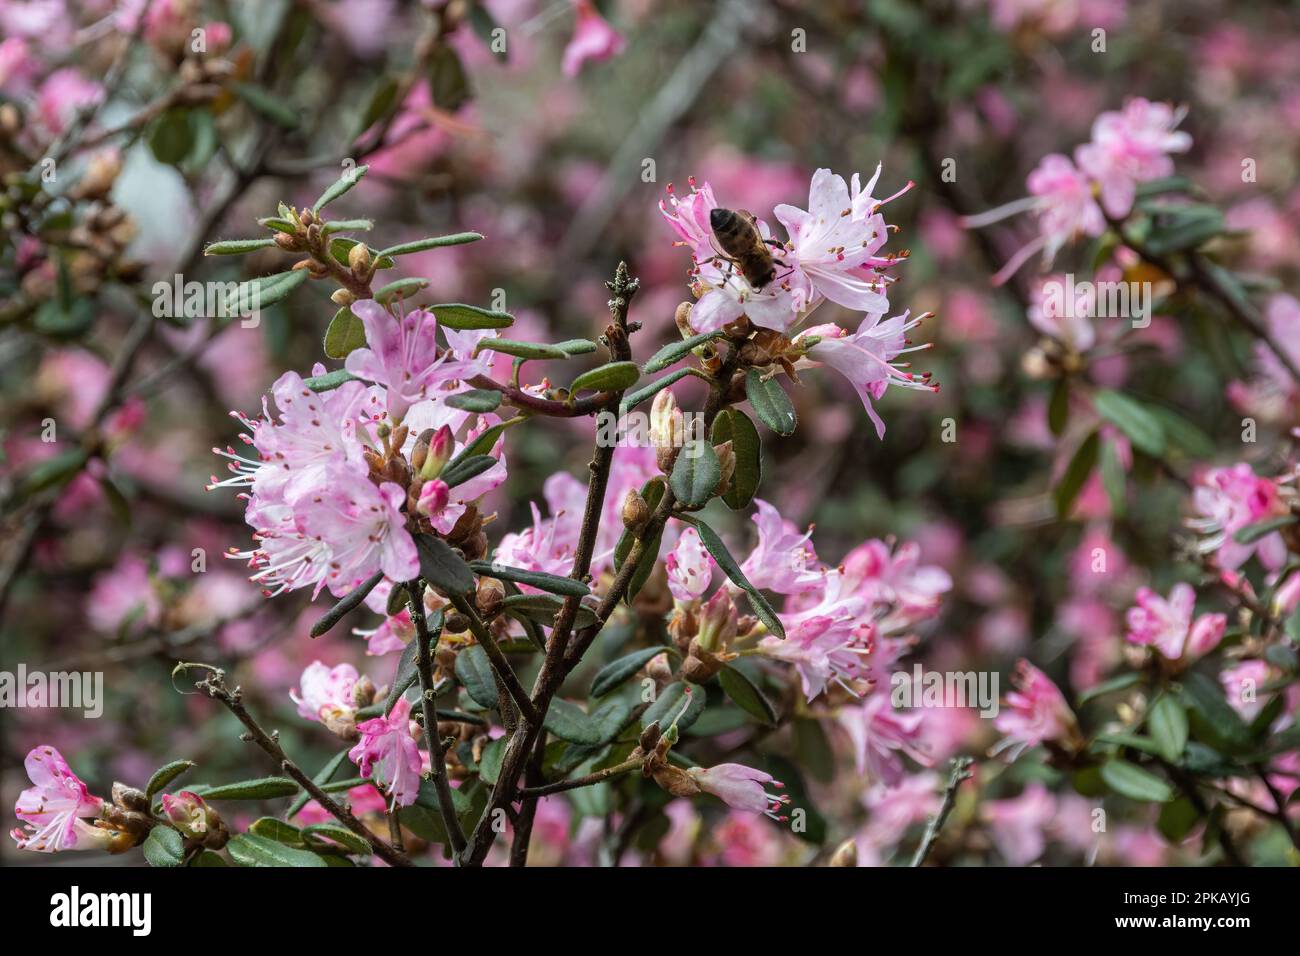 Pink flowers of Rhododendron telmateium shub with a bee, flowering during April or spring, UK Stock Photo